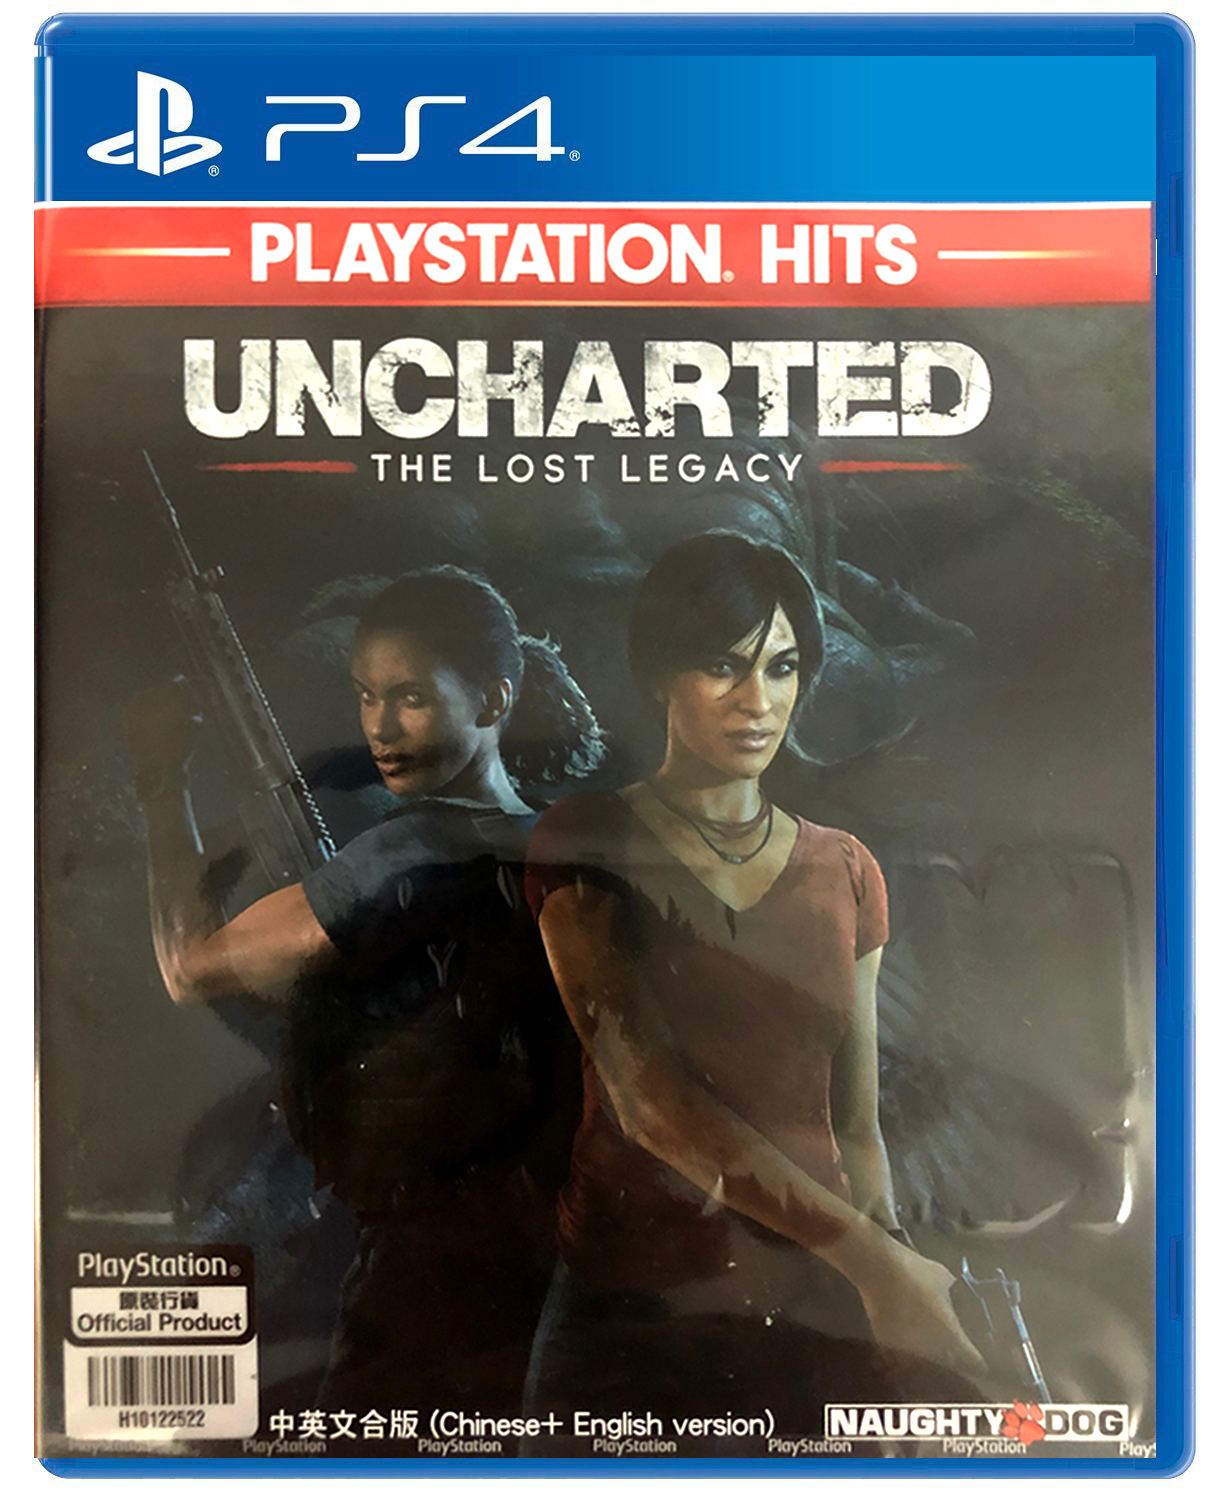 uncharted lost legacy digital code